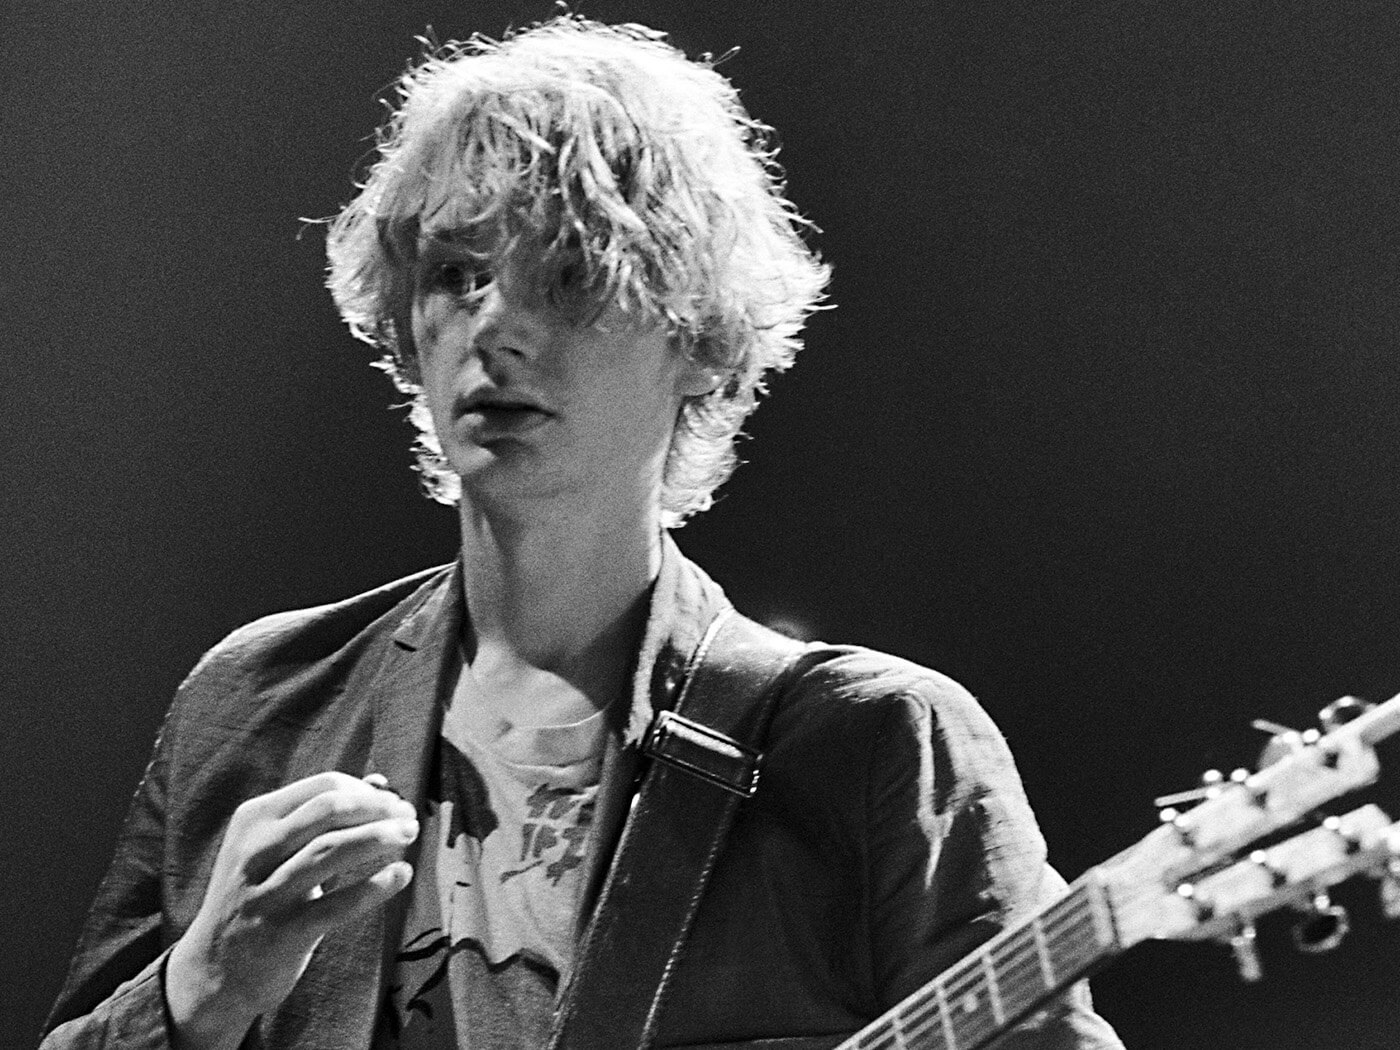 Public Image Ltd and The Clash guitarist Keith Levene has died aged 65